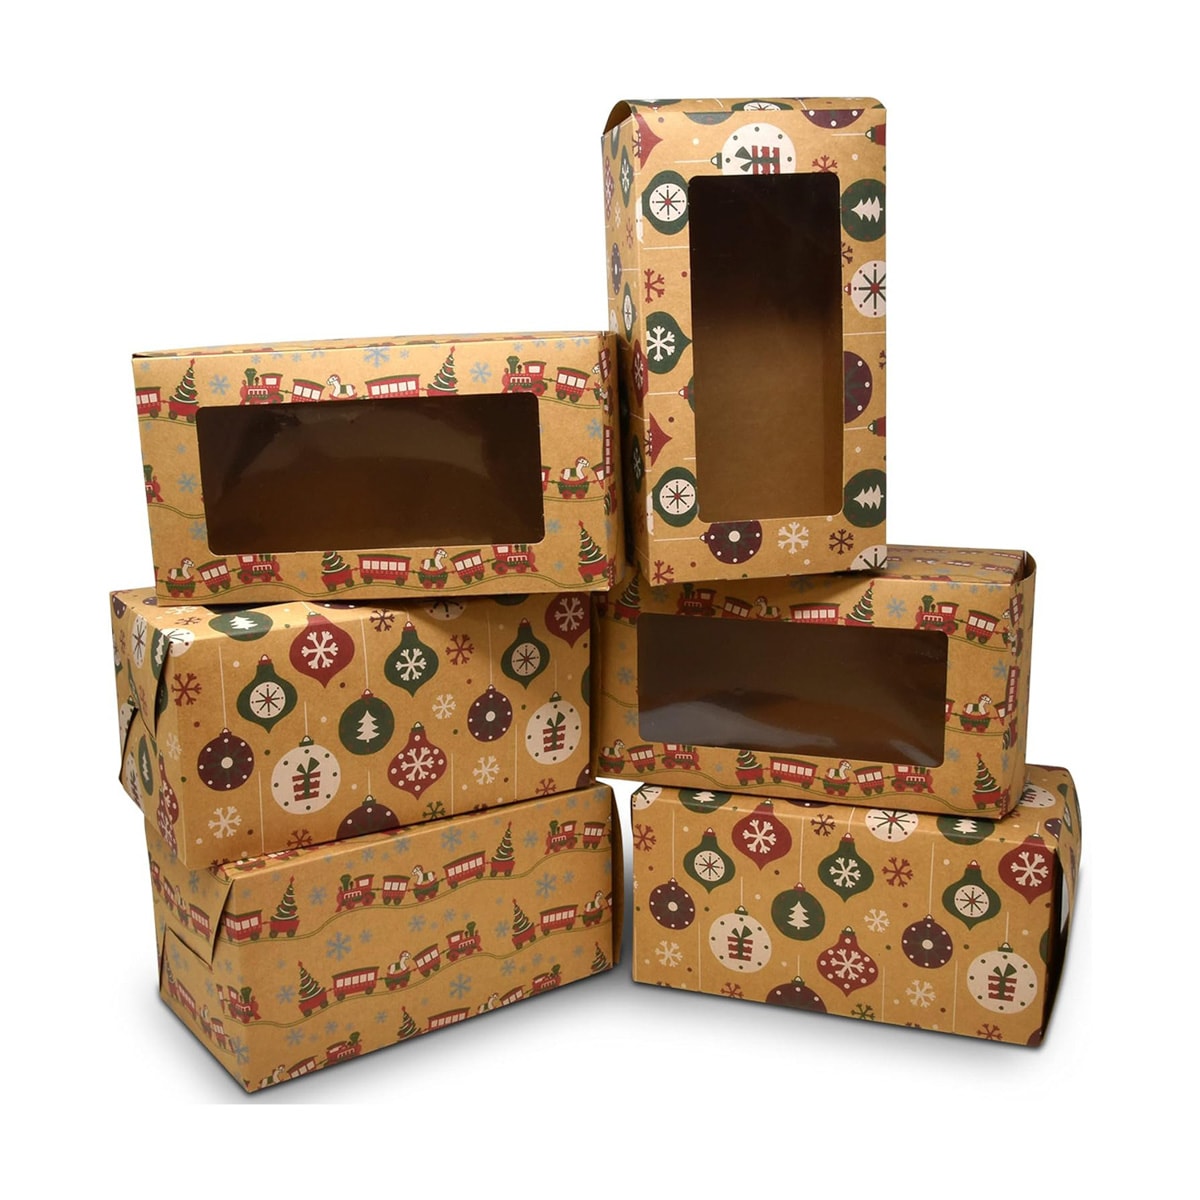 Christmas loaf bakery boxes.